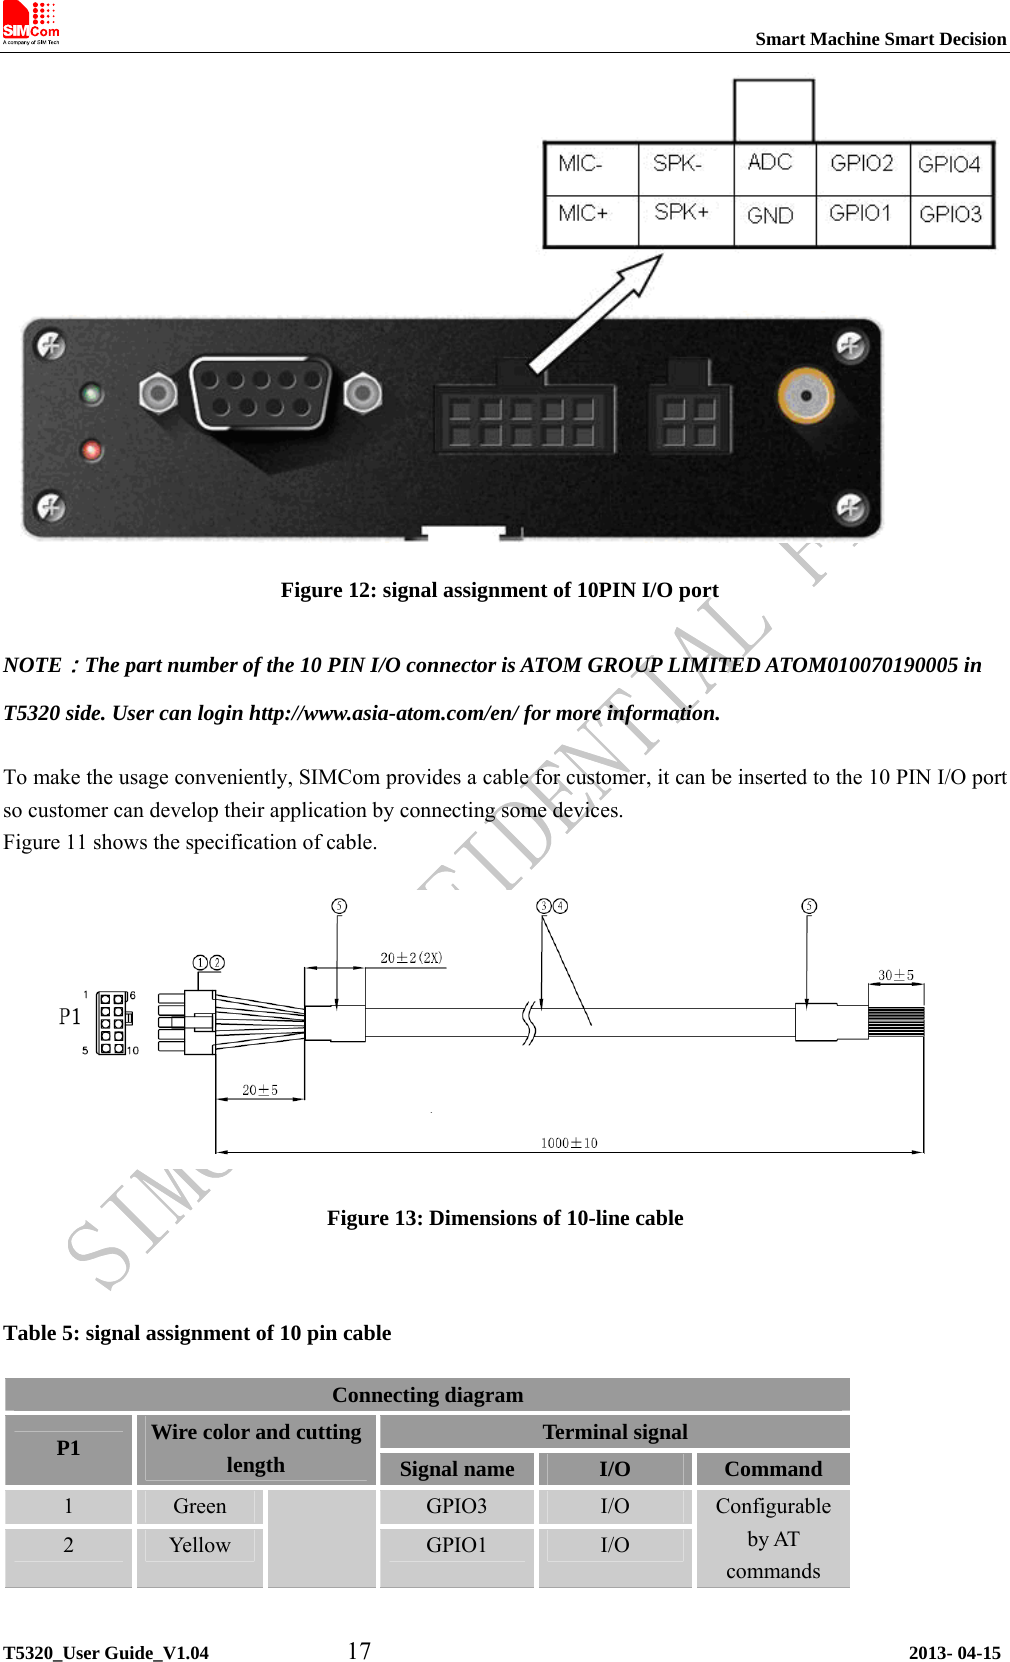                                                                           Smart Machine Smart Decision             T5320_User Guide_V1.04           17                                           2013- 04-15  Figure 12: signal assignment of 10PIN I/O port NOTE：The part number of the 10 PIN I/O connector is ATOM GROUP LIMITED ATOM010070190005 in T5320 side. User can login http://www.asia-atom.com/en/ for more information.  To make the usage conveniently, SIMCom provides a cable for customer, it can be inserted to the 10 PIN I/O port so customer can develop their application by connecting some devices. Figure 11 shows the specification of cable.    Figure 13: Dimensions of 10-line cable    Table 5: signal assignment of 10 pin cable Connecting diagram Terminal signal Wire color and cutting P1  length  Signal name  I/O  Command 1  Green  GPIO3  I/O 2  Yellow    GPIO1  I/O Configurable by AT commands 